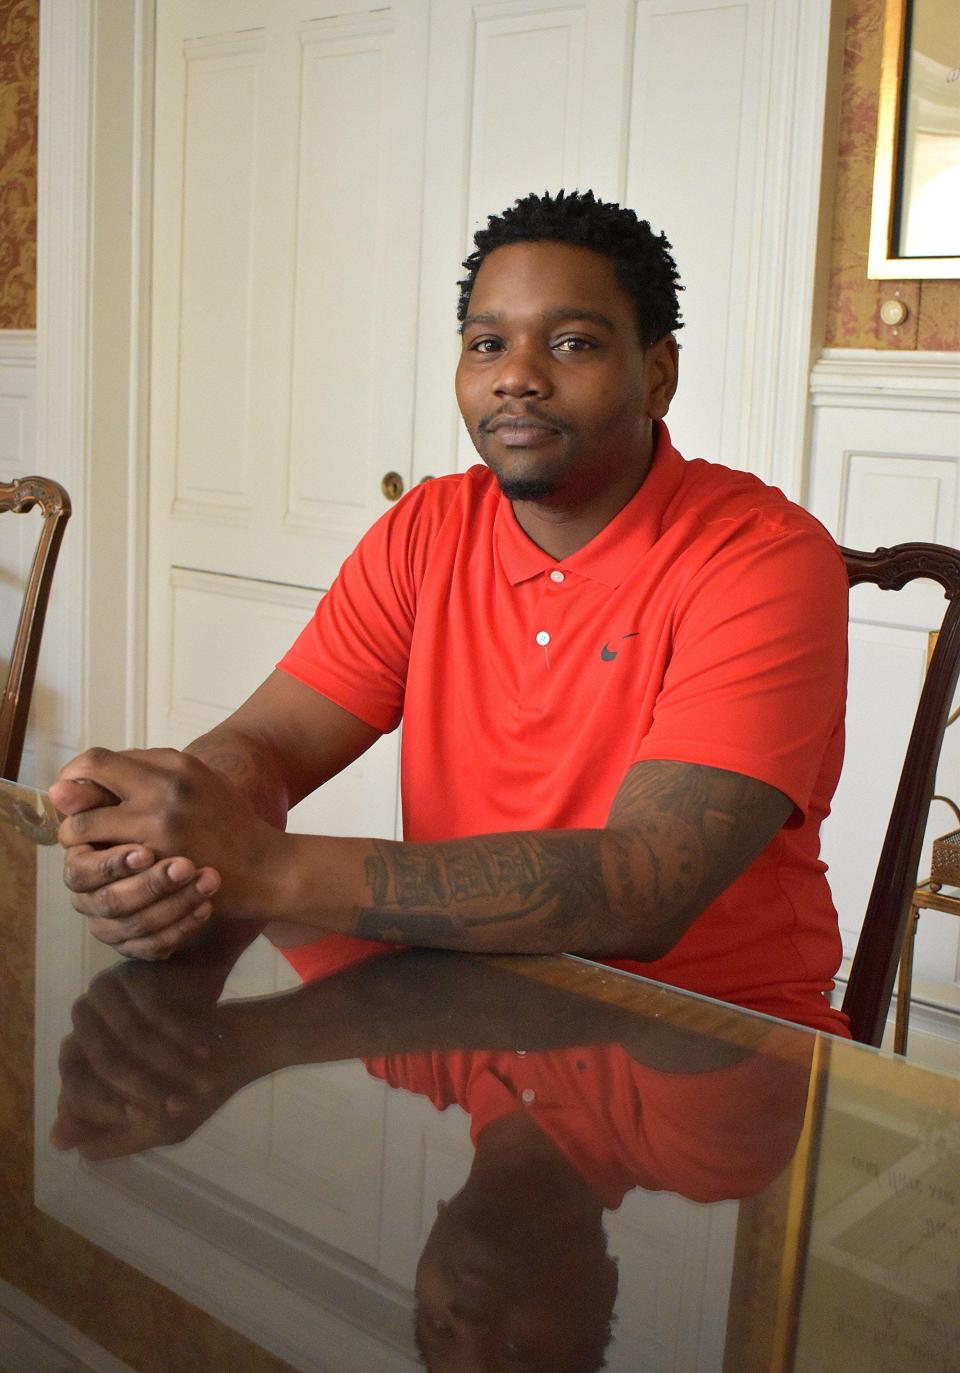 Davaughn Tate-Johnson, seen in 2020, when he was 31, has received $50,000 to settle a lawsuit that claimed an Erie police officer, Joshua Allison, used excessive force by punching Tate-Johnson during an arrest following a traffic stop in January 2019.